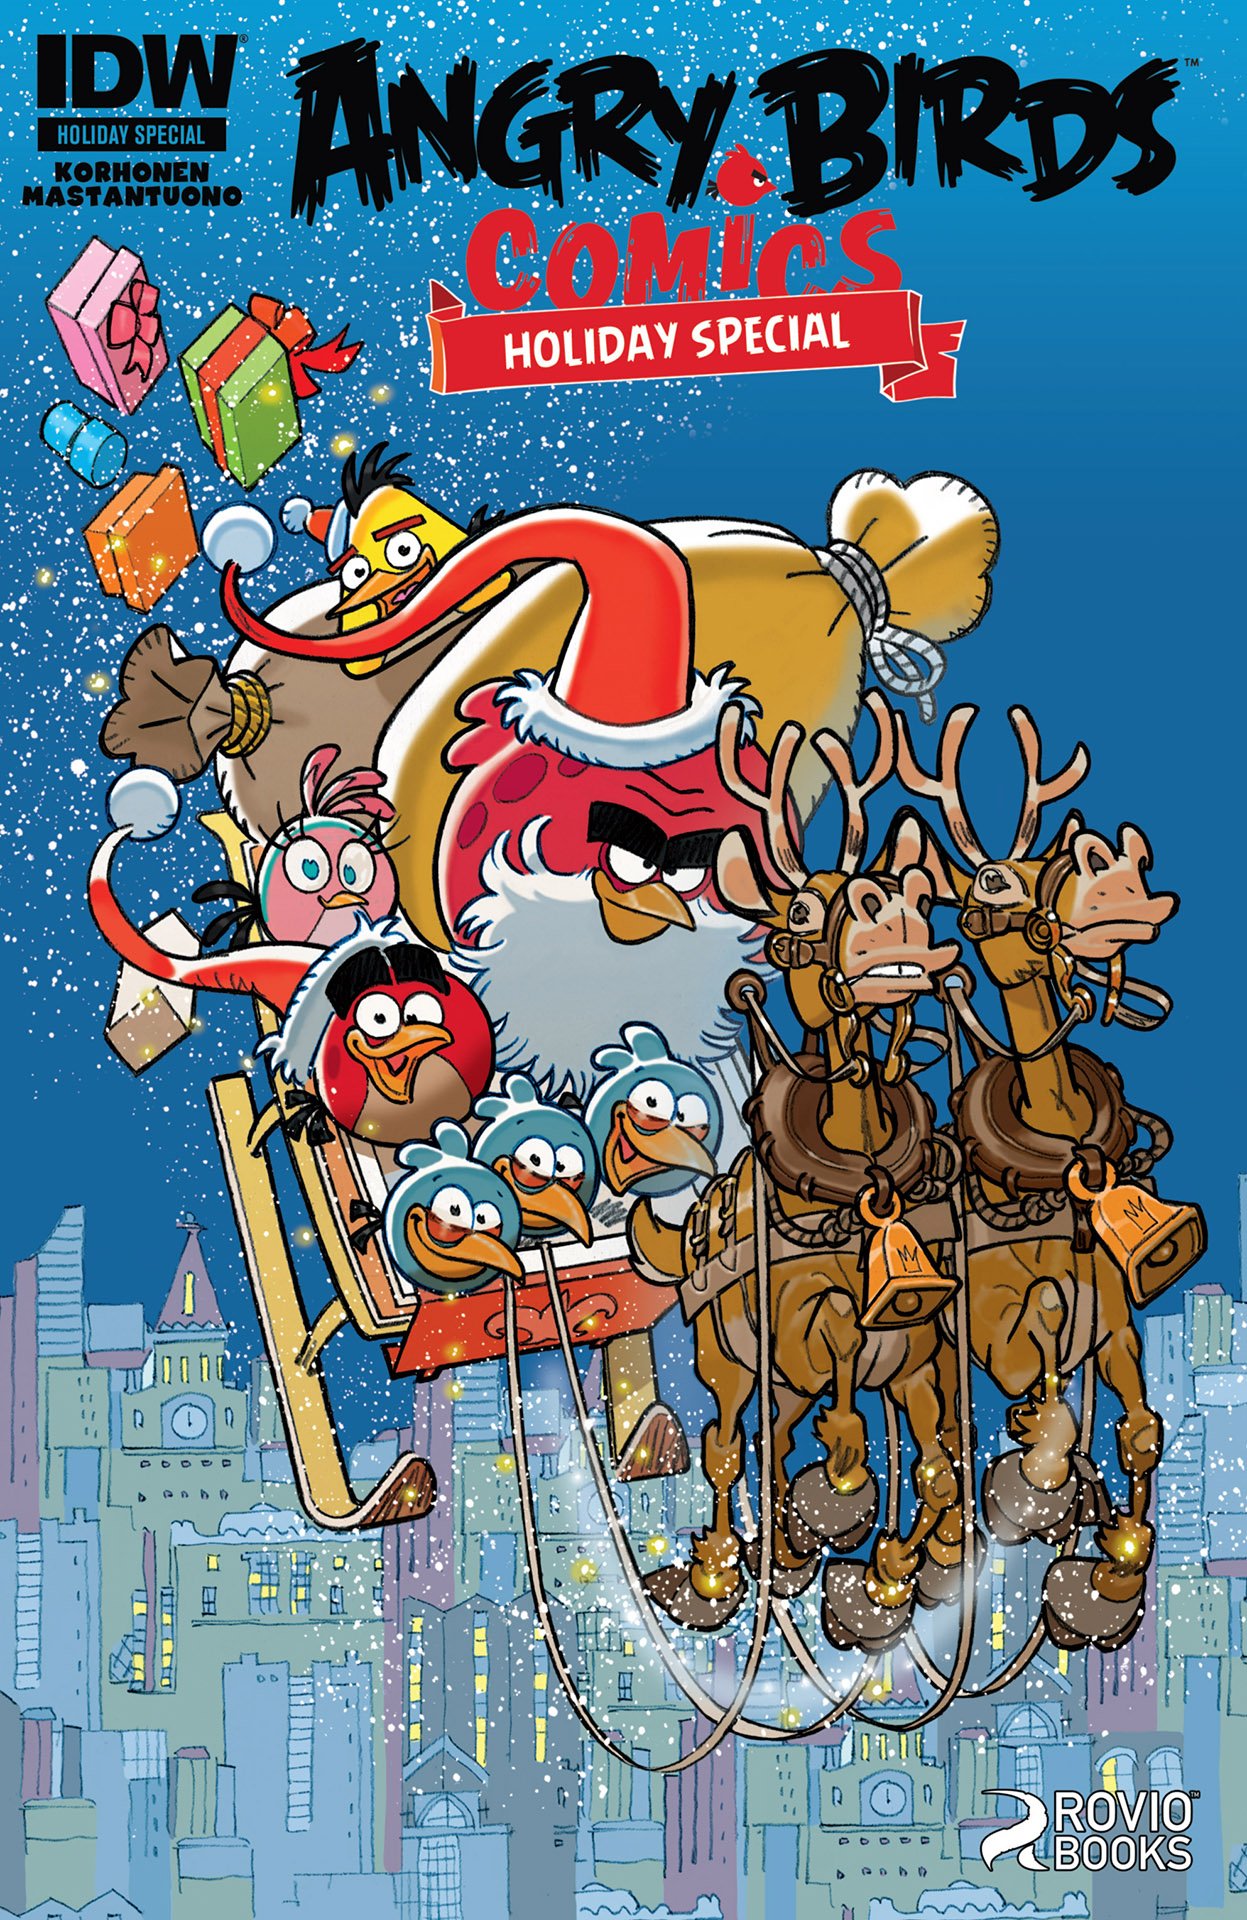 Angry Birds Comics Holiday Special (December 2014)